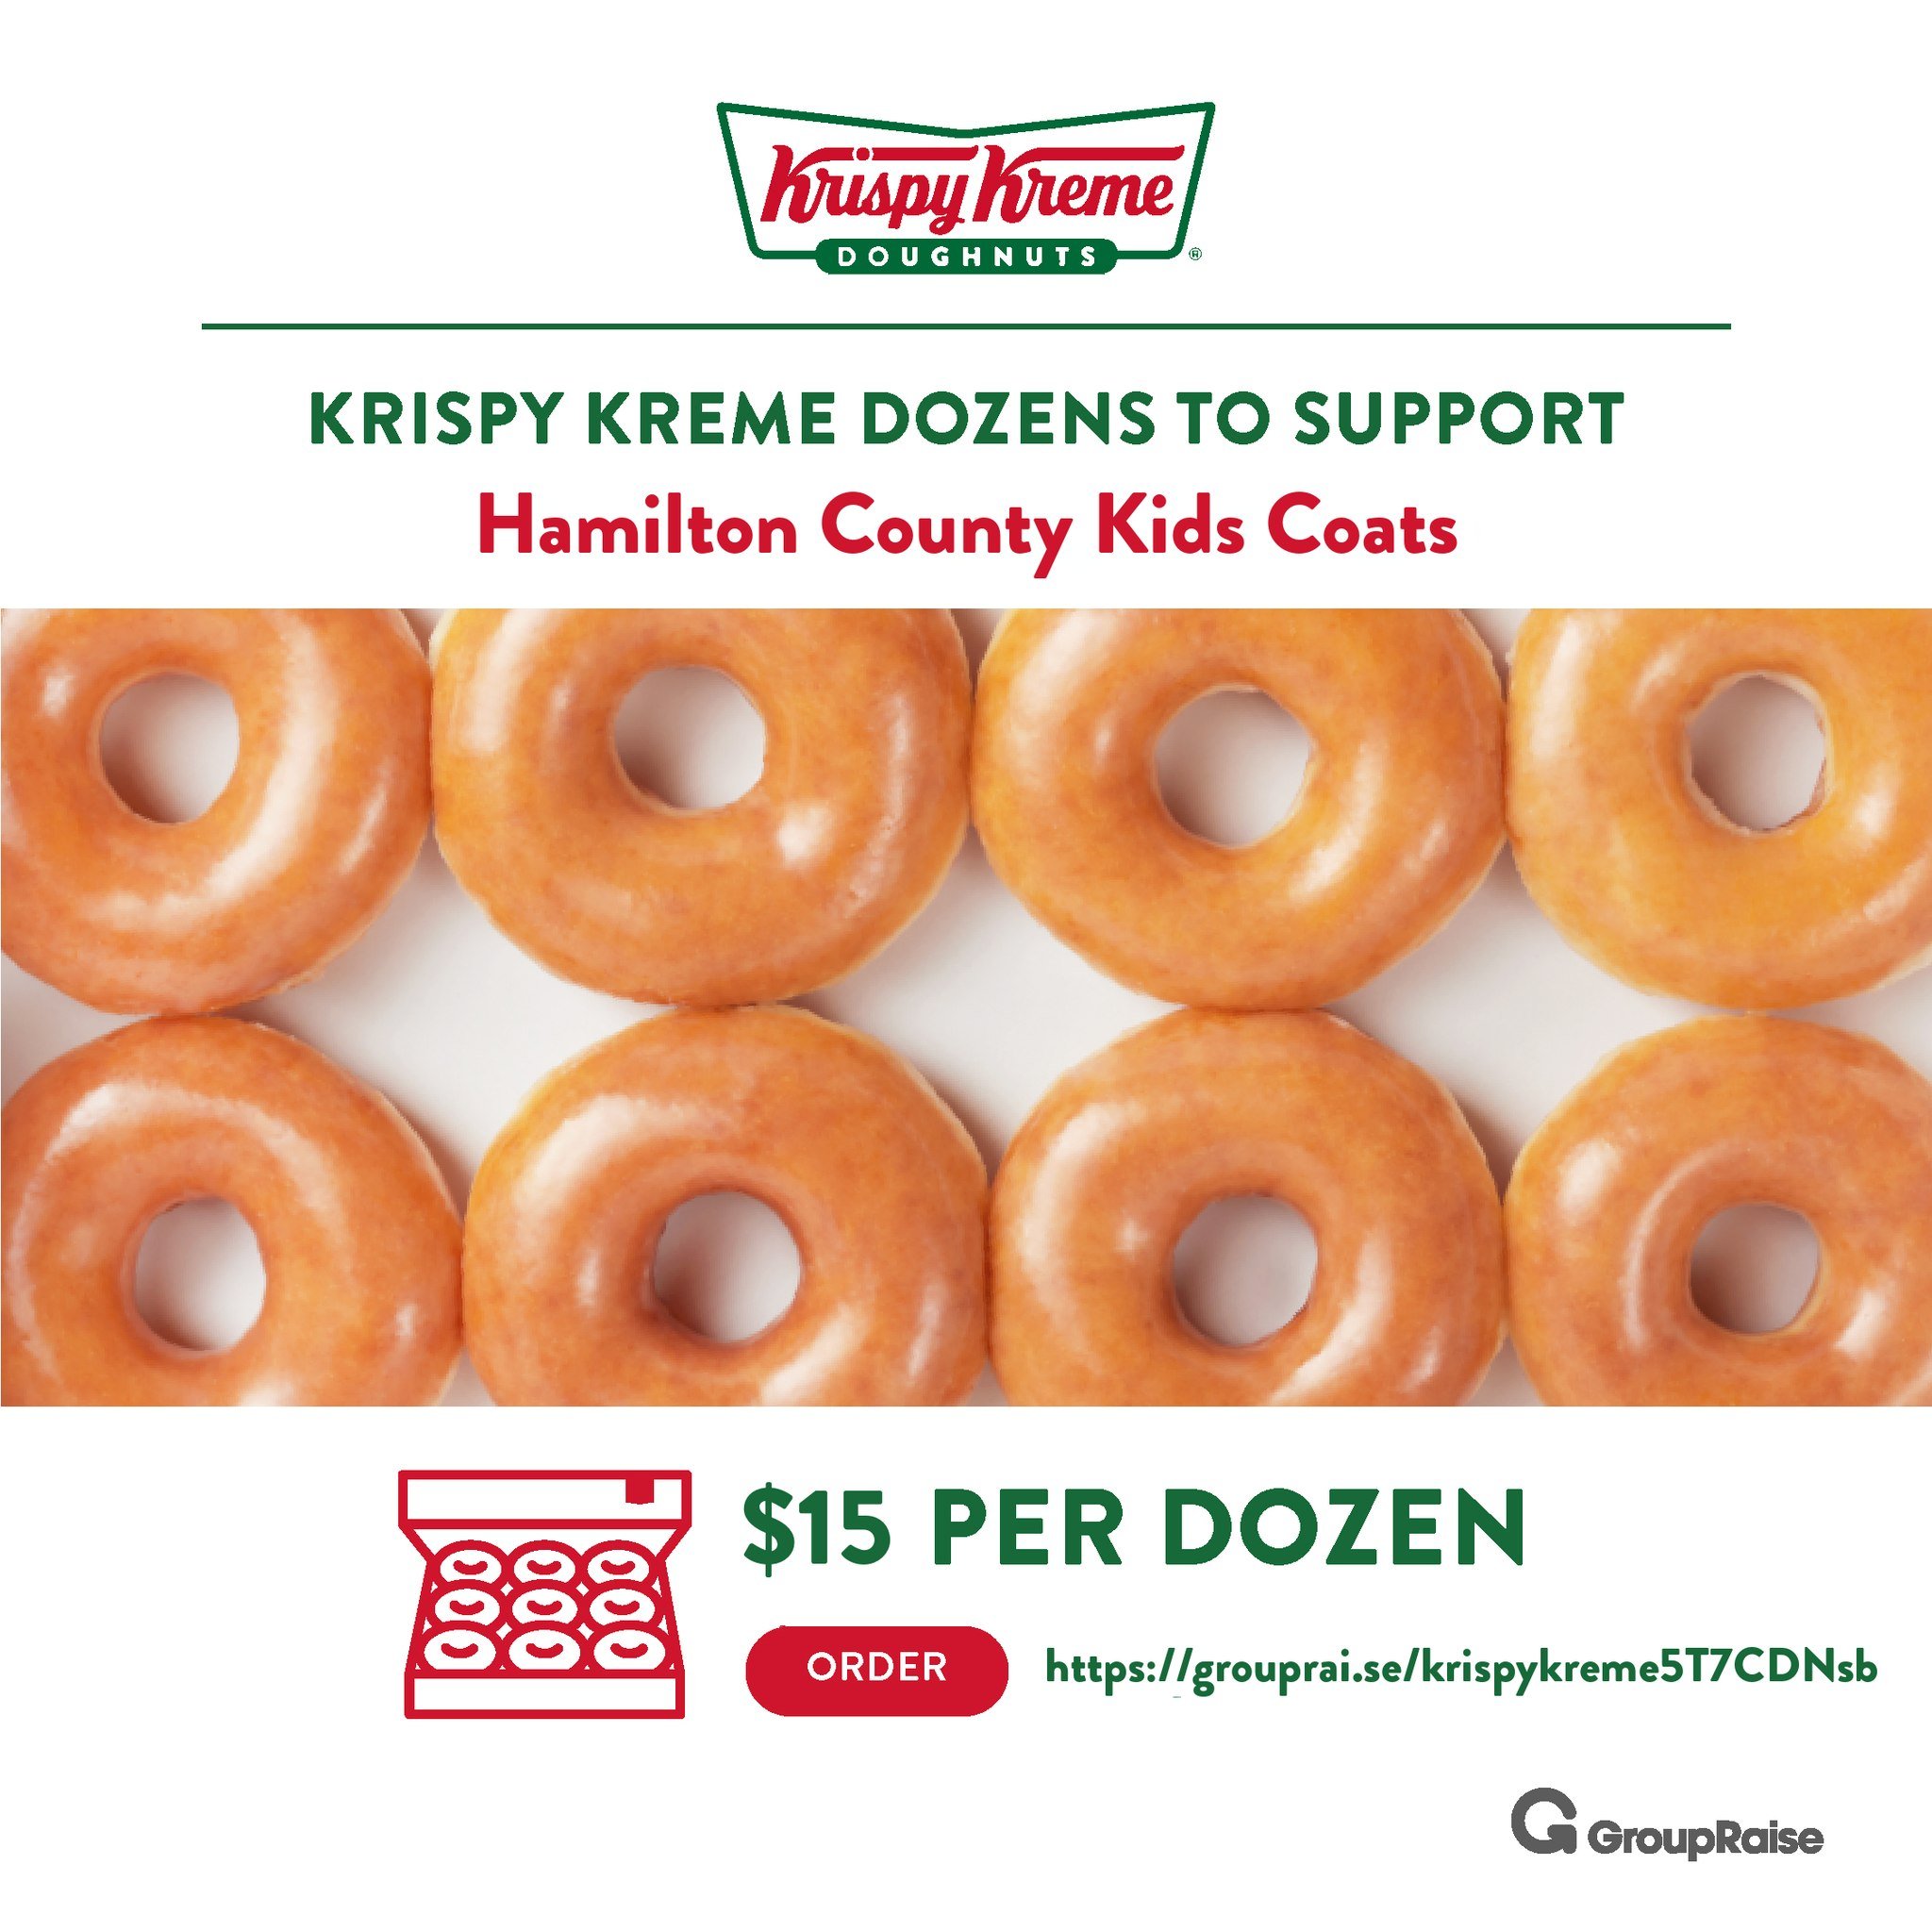 The final countdown is on!! 🍩🕛 Just 48 hours left to get your @KrispyKreme dozens in support of Hamilton County Kids Coats. With 50% of your order donated back, there is no better reason to treat yourself today 😄 Don't leave your morning coffee ha